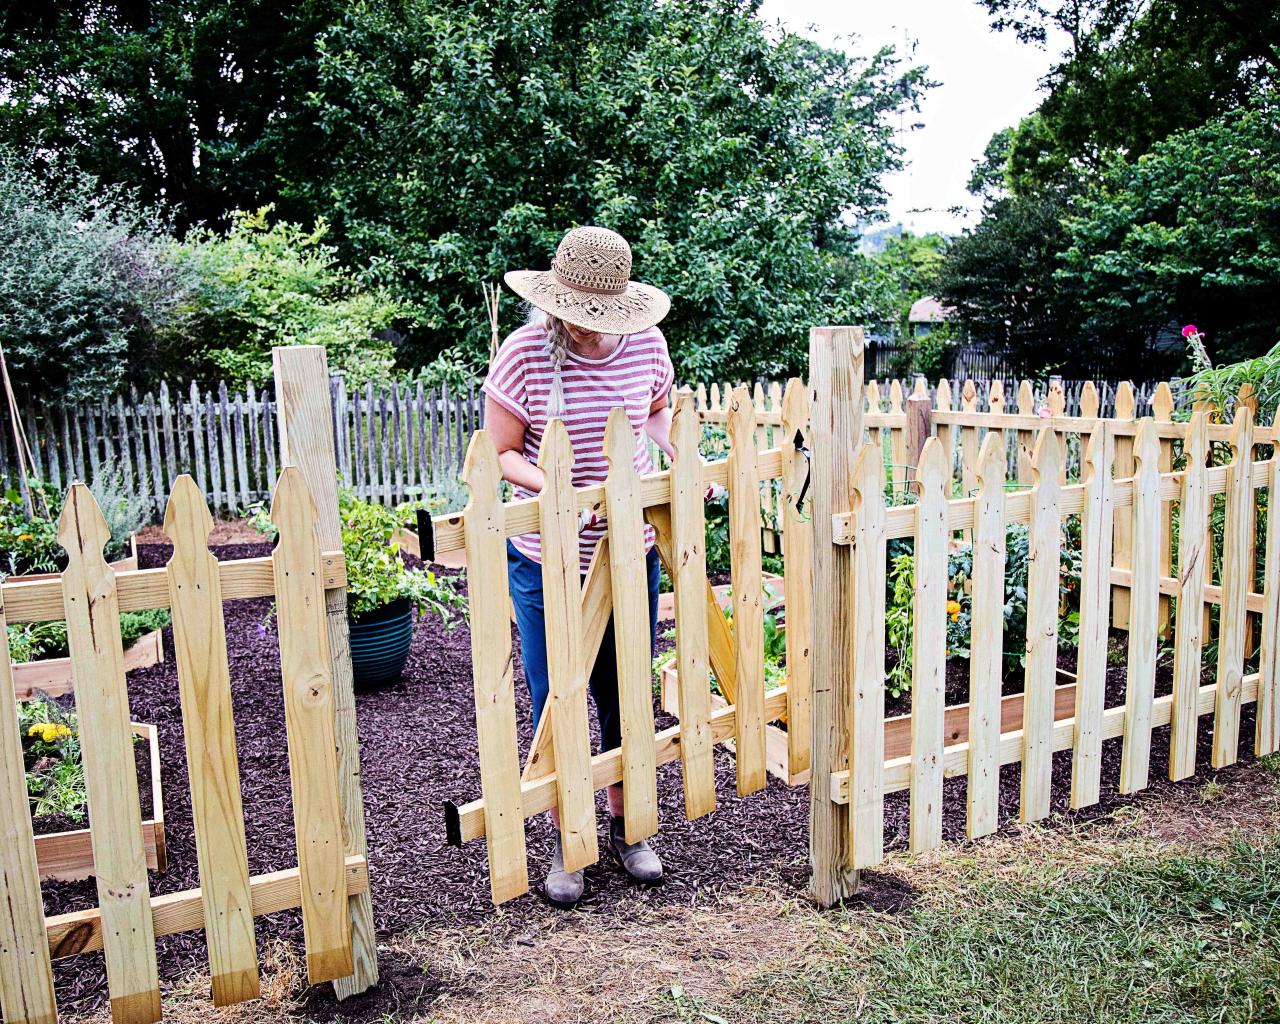 How To Build A Picket Fence Garden Gate Hgtv